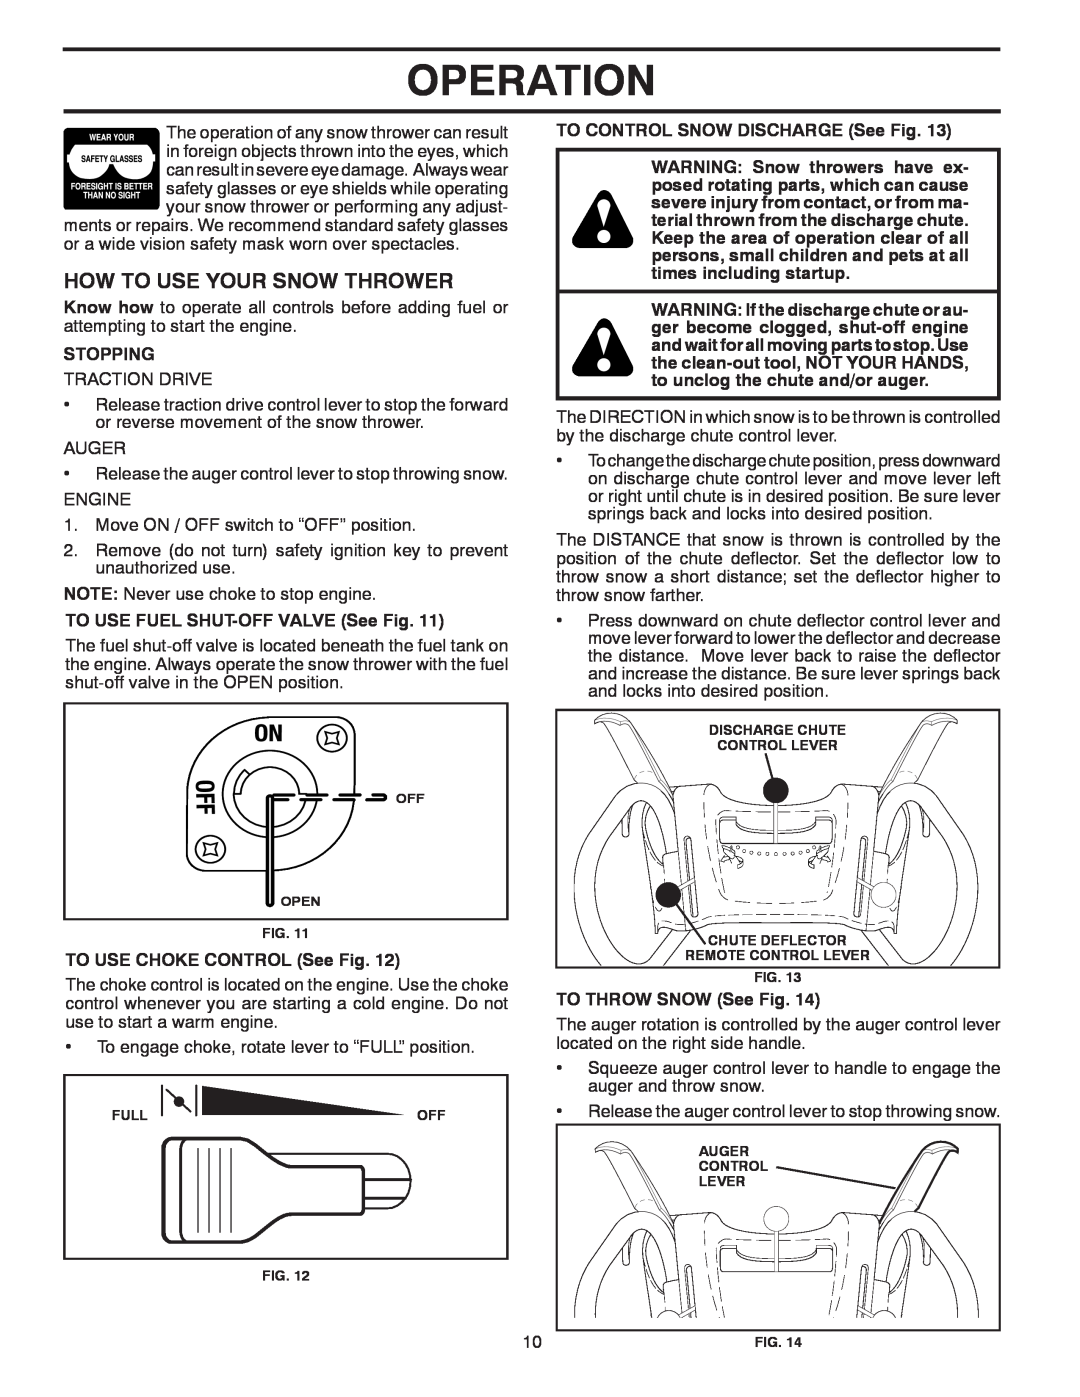 Poulan 96192003100, PR1030ES How To Use Your Snow Thrower, Operation, Stopping, TO USE FUEL SHUT-OFF VALVE See Fig 